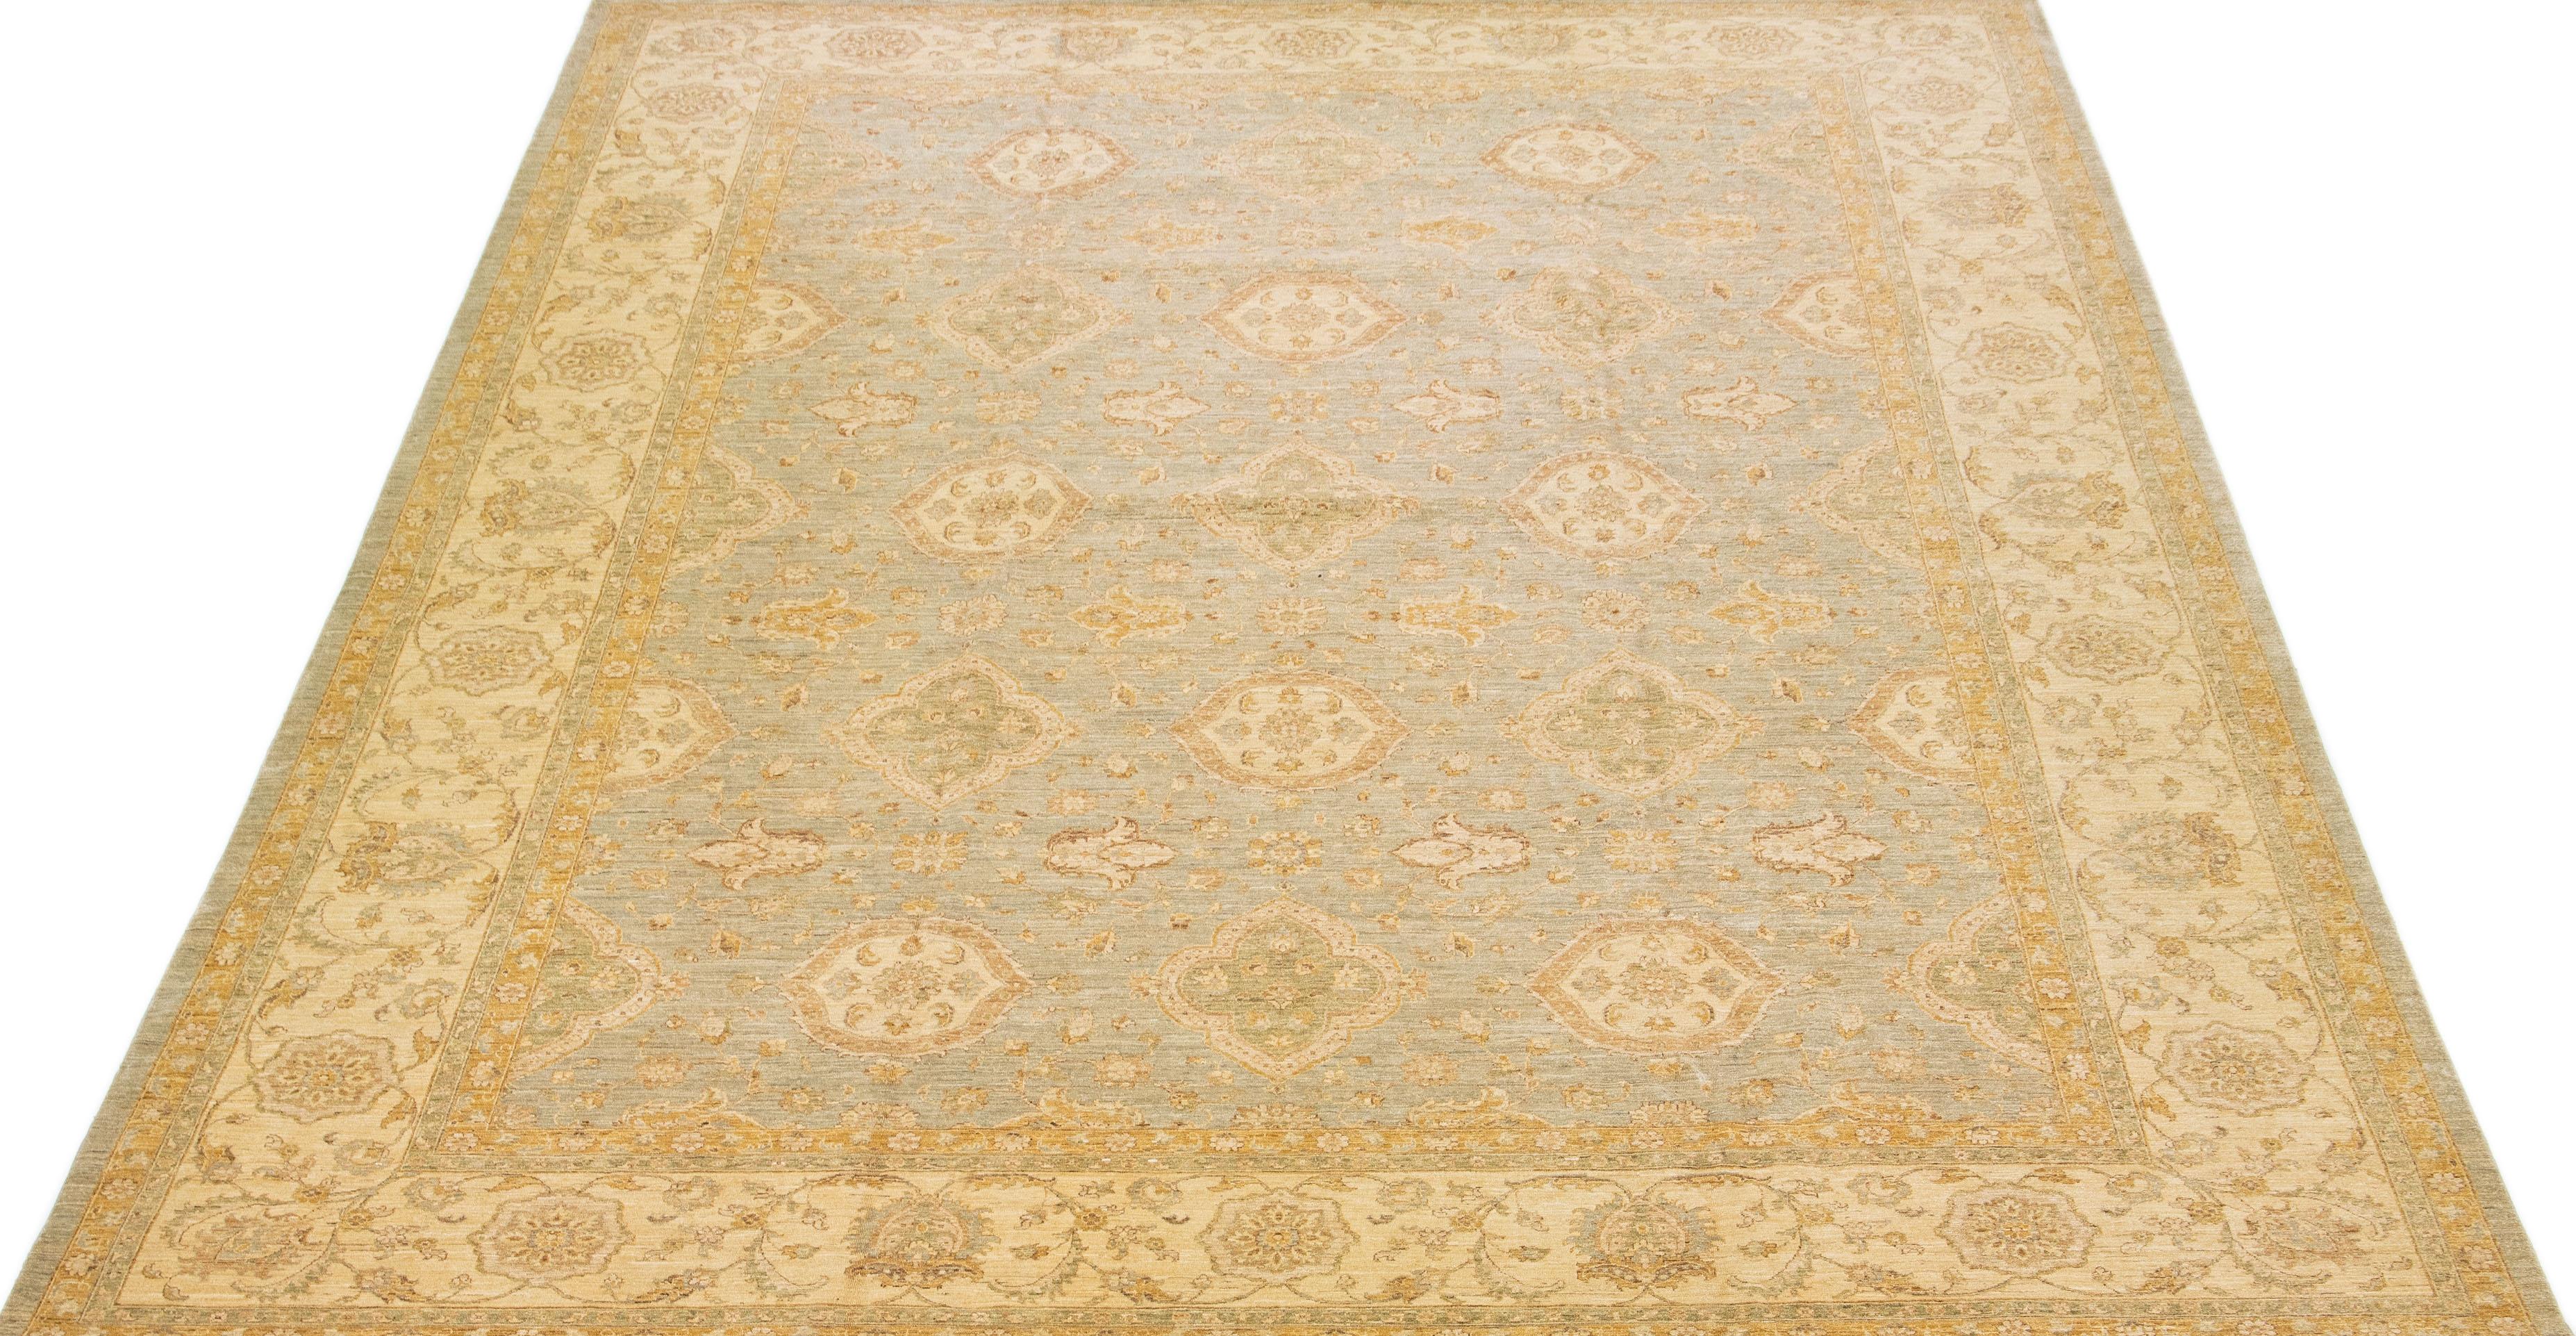 Beautiful modern Persian style Indian hand-knotted wool rug with a gray color field with brown and green accents on a Classic Botanica floral design.

This rug measures 13'3